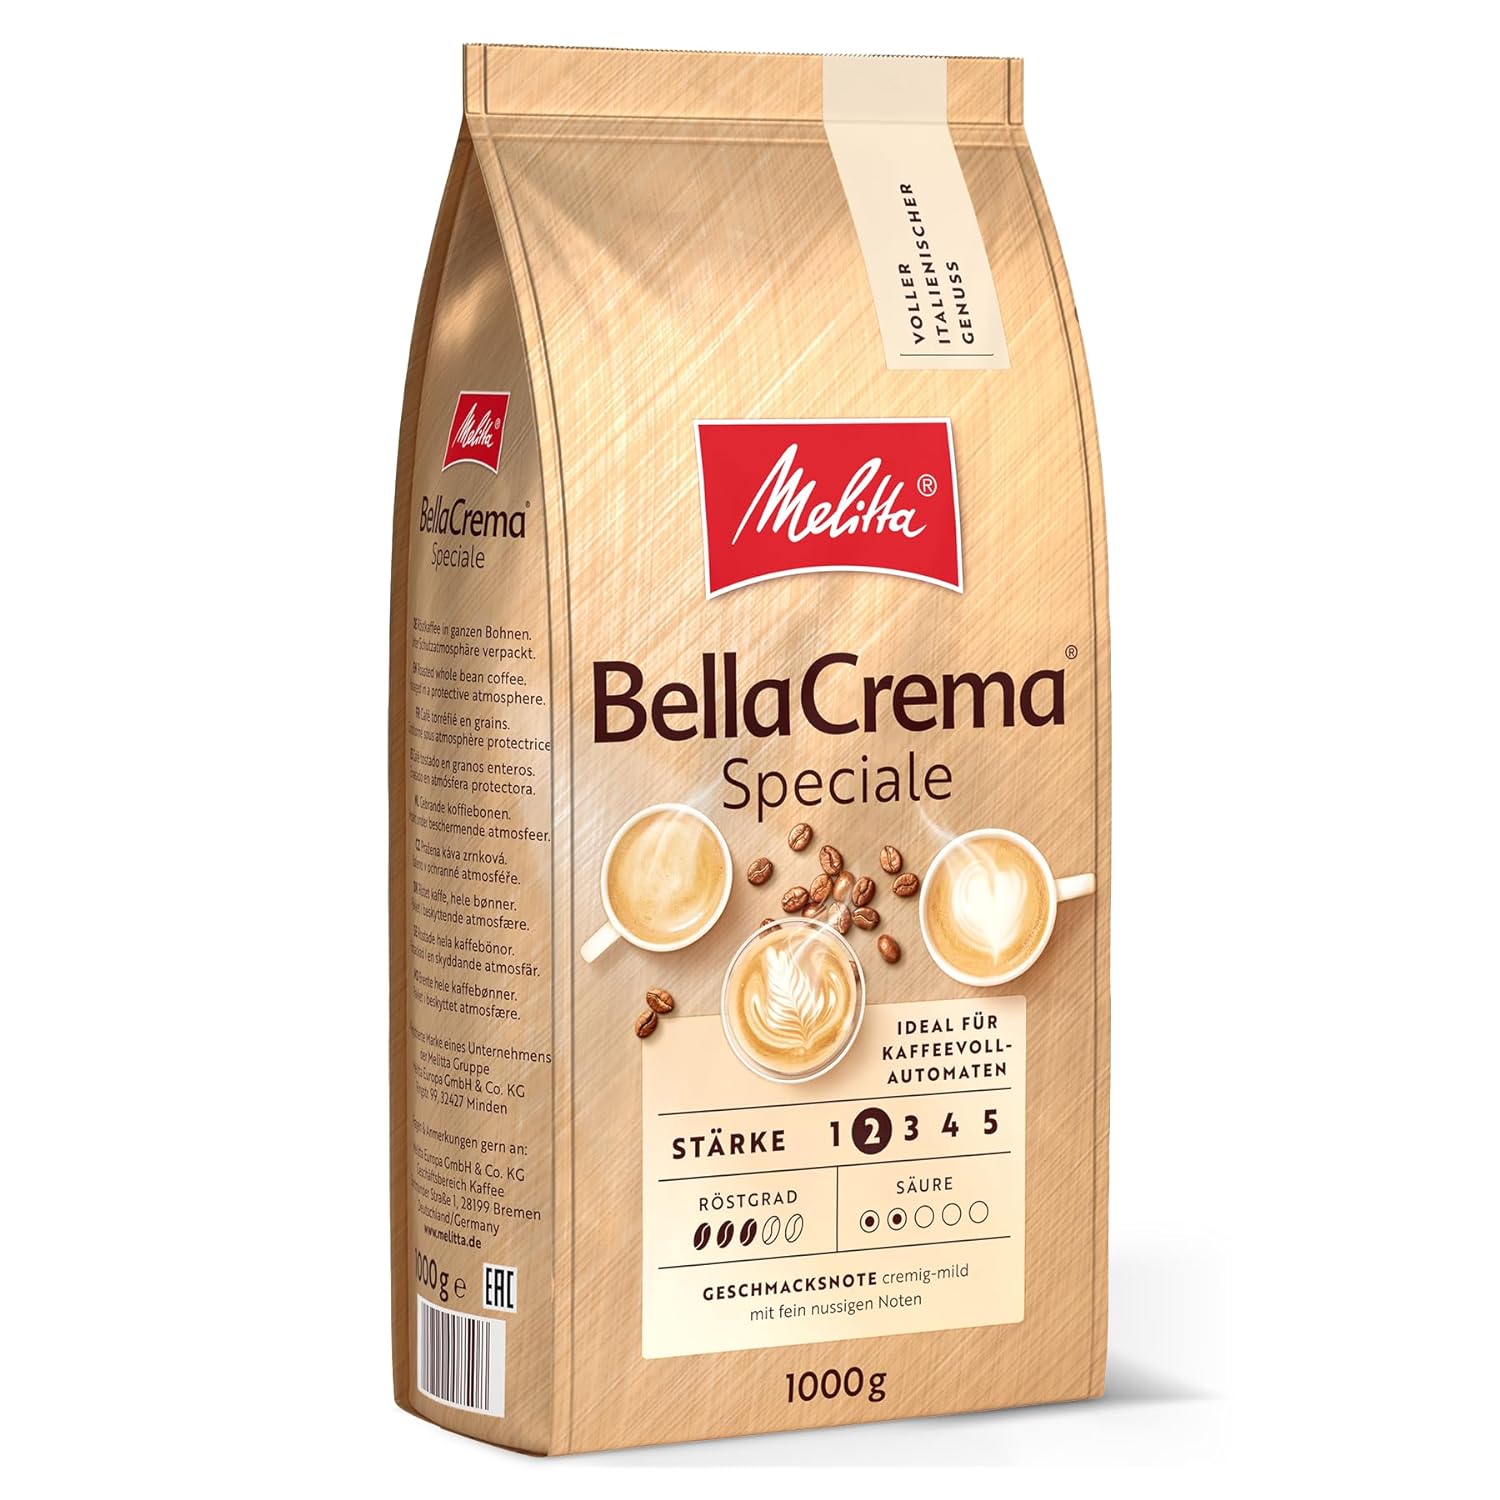 Melitta Bellacrema Speciale Whole Coffee Beans 1 kg, Unzround, Coffee Beans for Fully Automatic Coffee Machine, Medium Roasting, Roasted in Germany, Strength 2